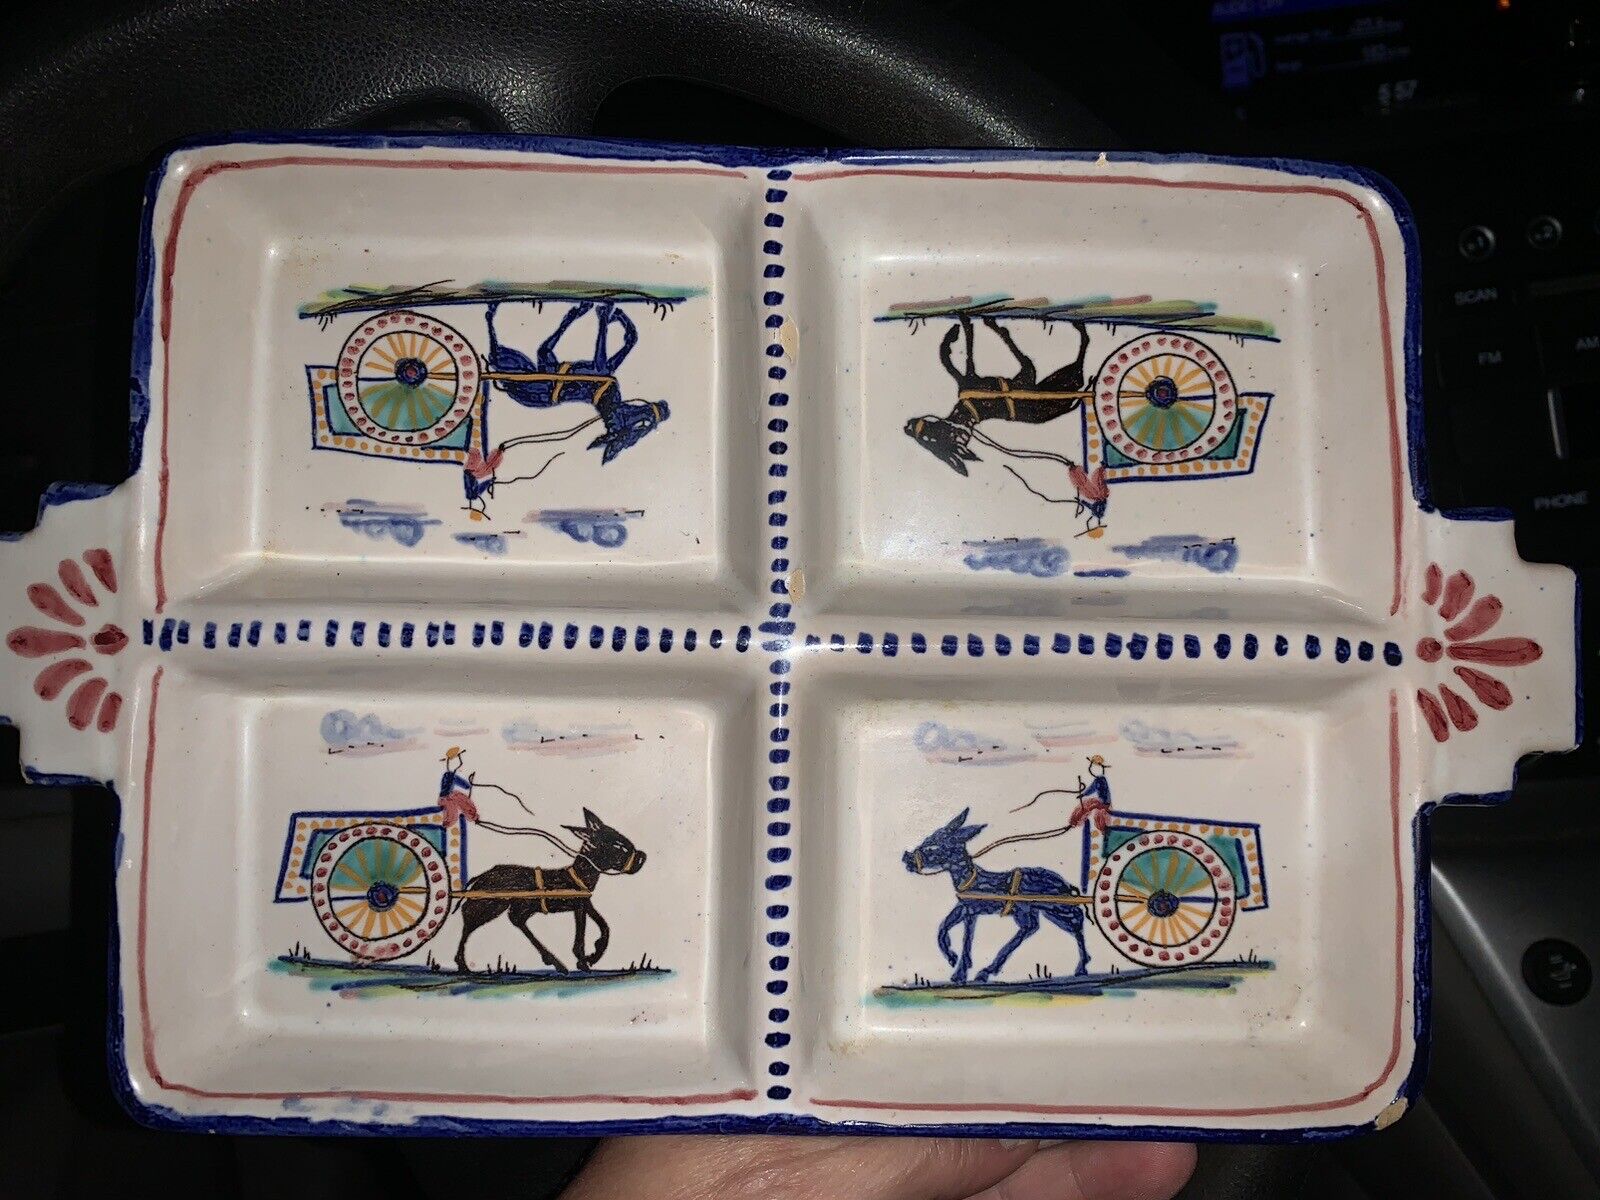 Vtg VANRO 8852 Ceramic 4 Section Tray With Handles Man On Cart Pulled By Donkey